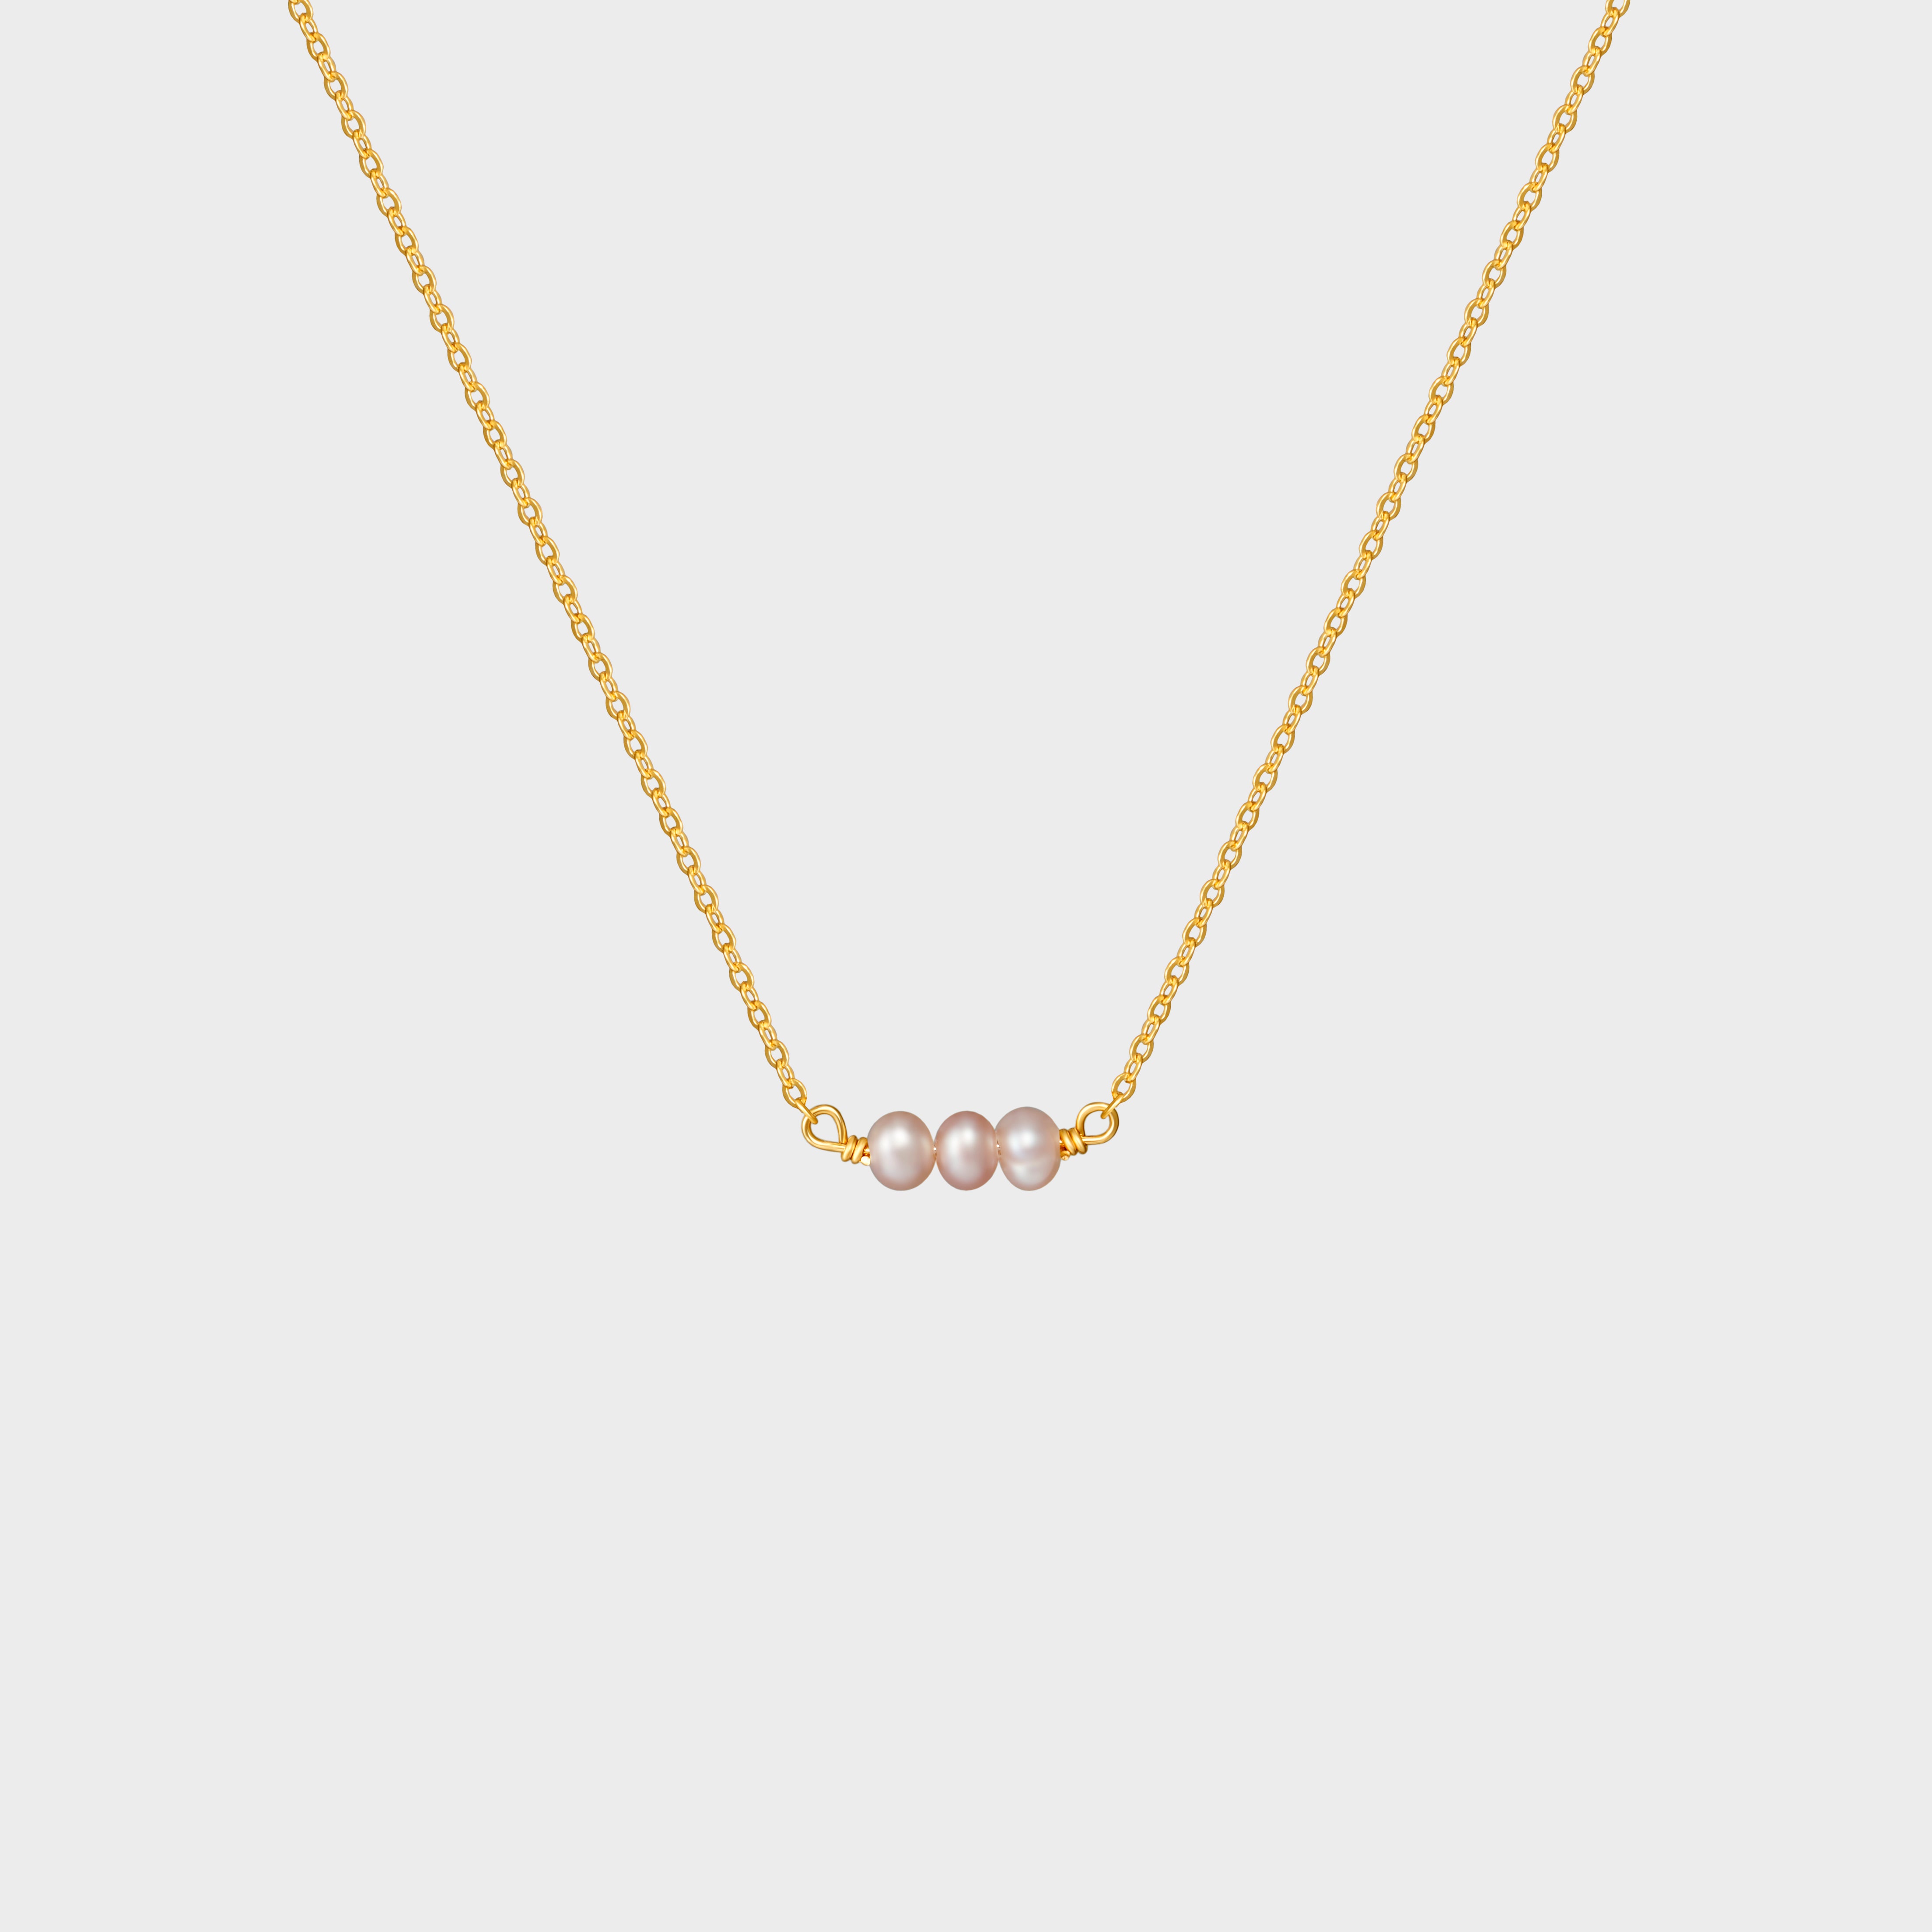 Triple Tiny Blush Pearls Necklace